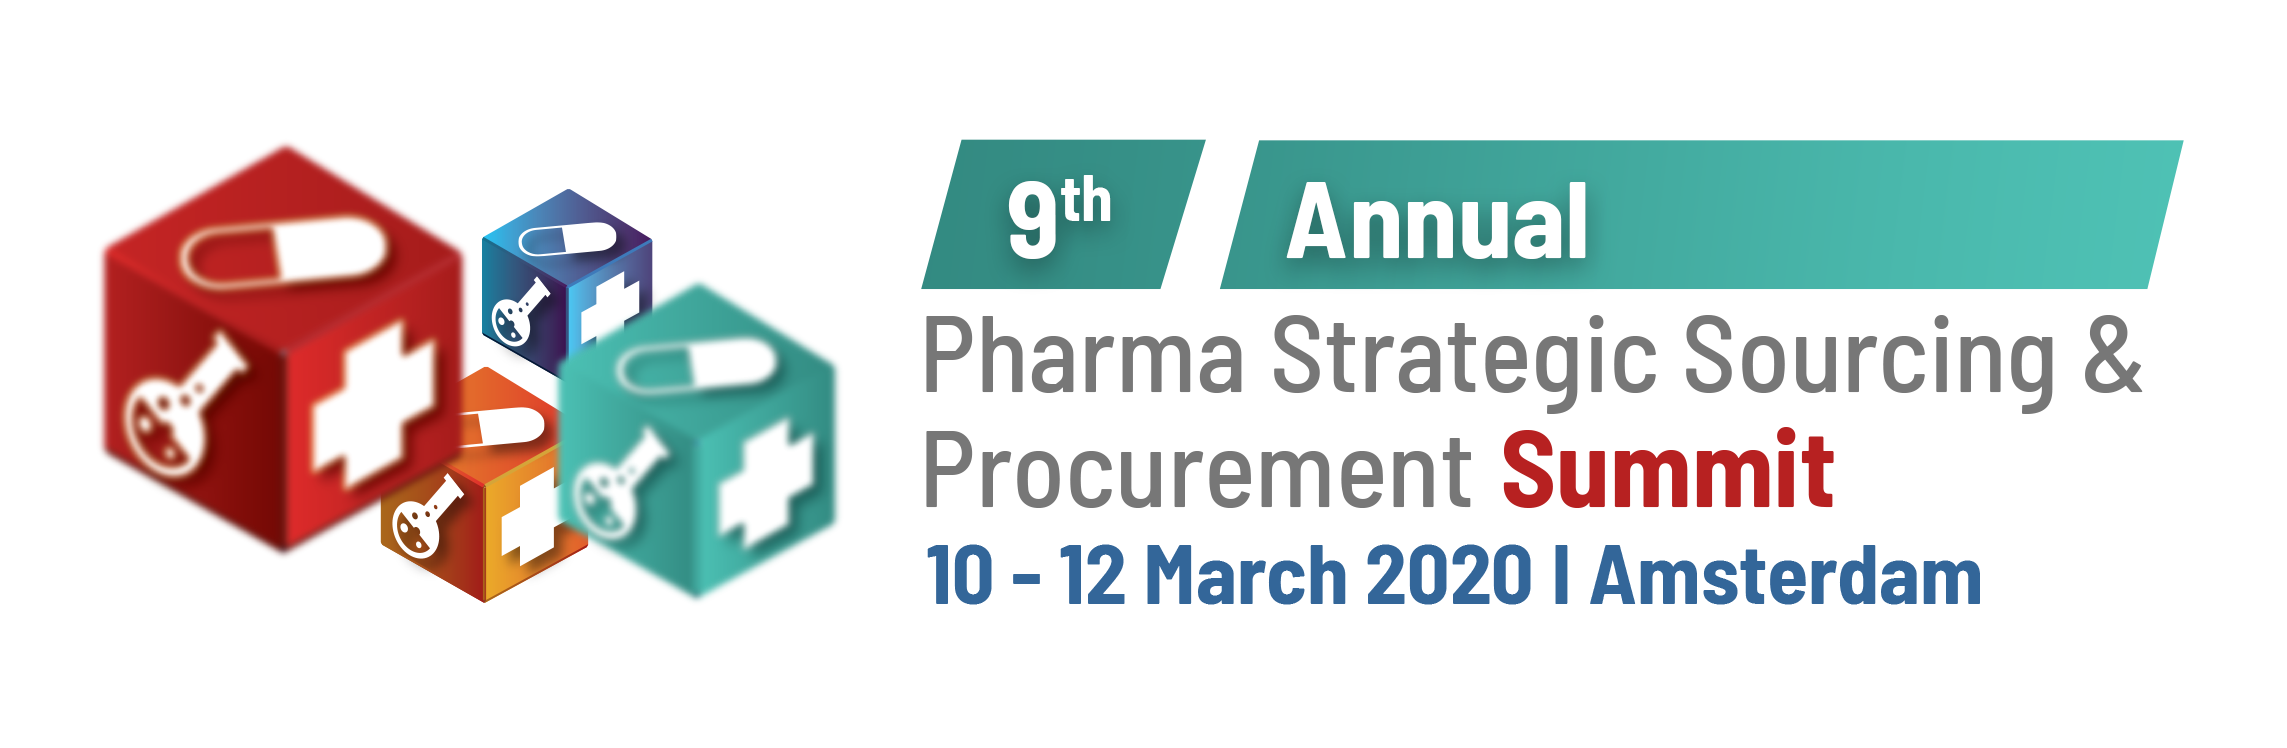 9th Annual Pharma Strategic Sourcing and Procurement Summit.png